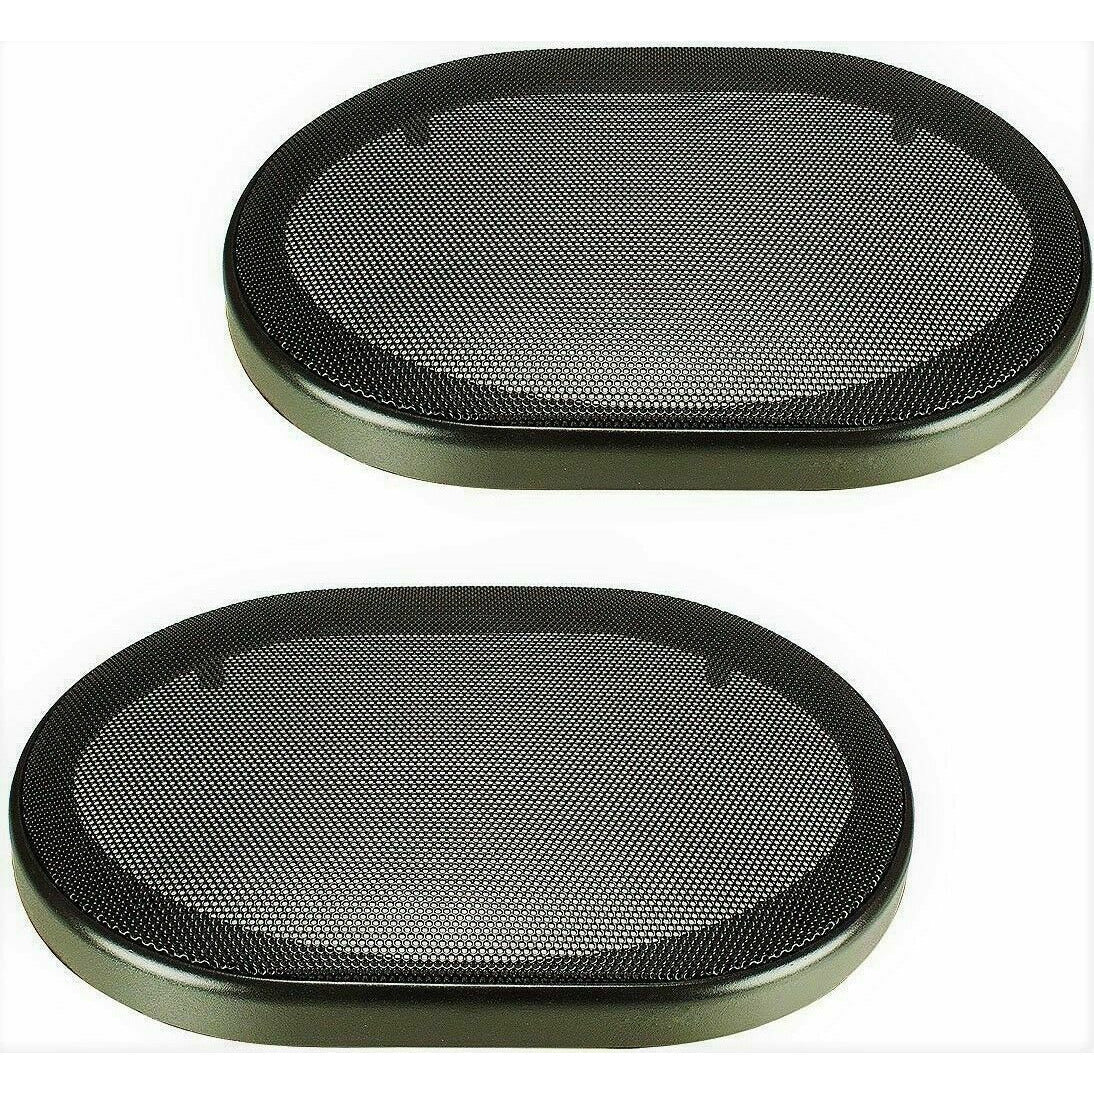 2 XP Audio 5"x7" / 6"x8" universal speaker coaxial component protective grills covers